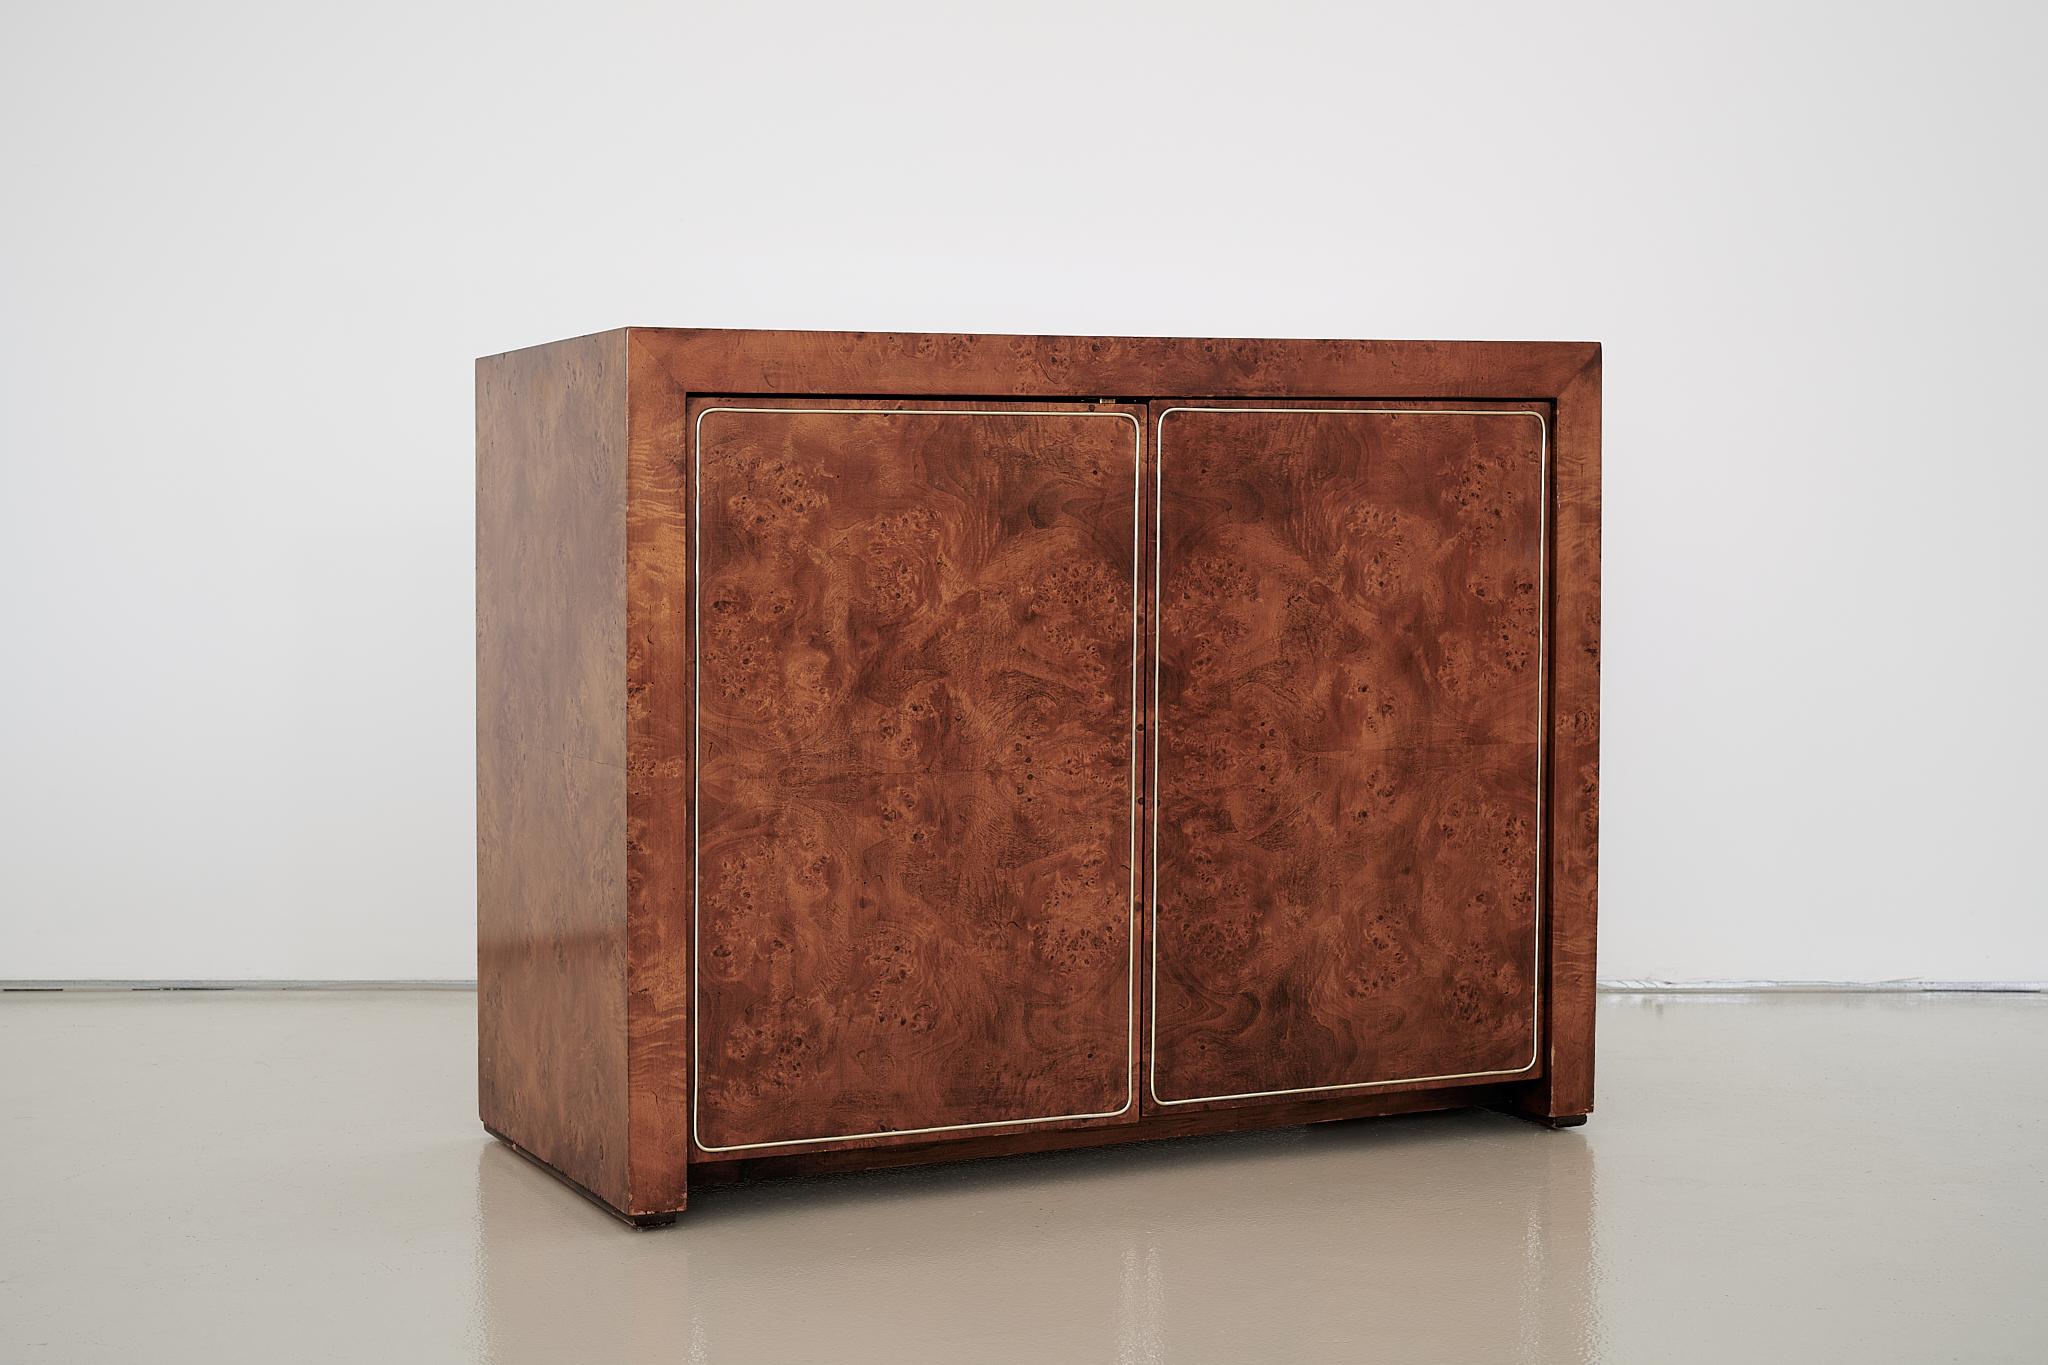 1970’s two-door burl cabinet manufactured by Heckman Furniture

Bird’s eye figure burl veneer stained in a walnut tone warm brown

Thin brass inlay on the doors

Adjustable euro-style hinges

Interior shallow drawer (Heckman stamp on right